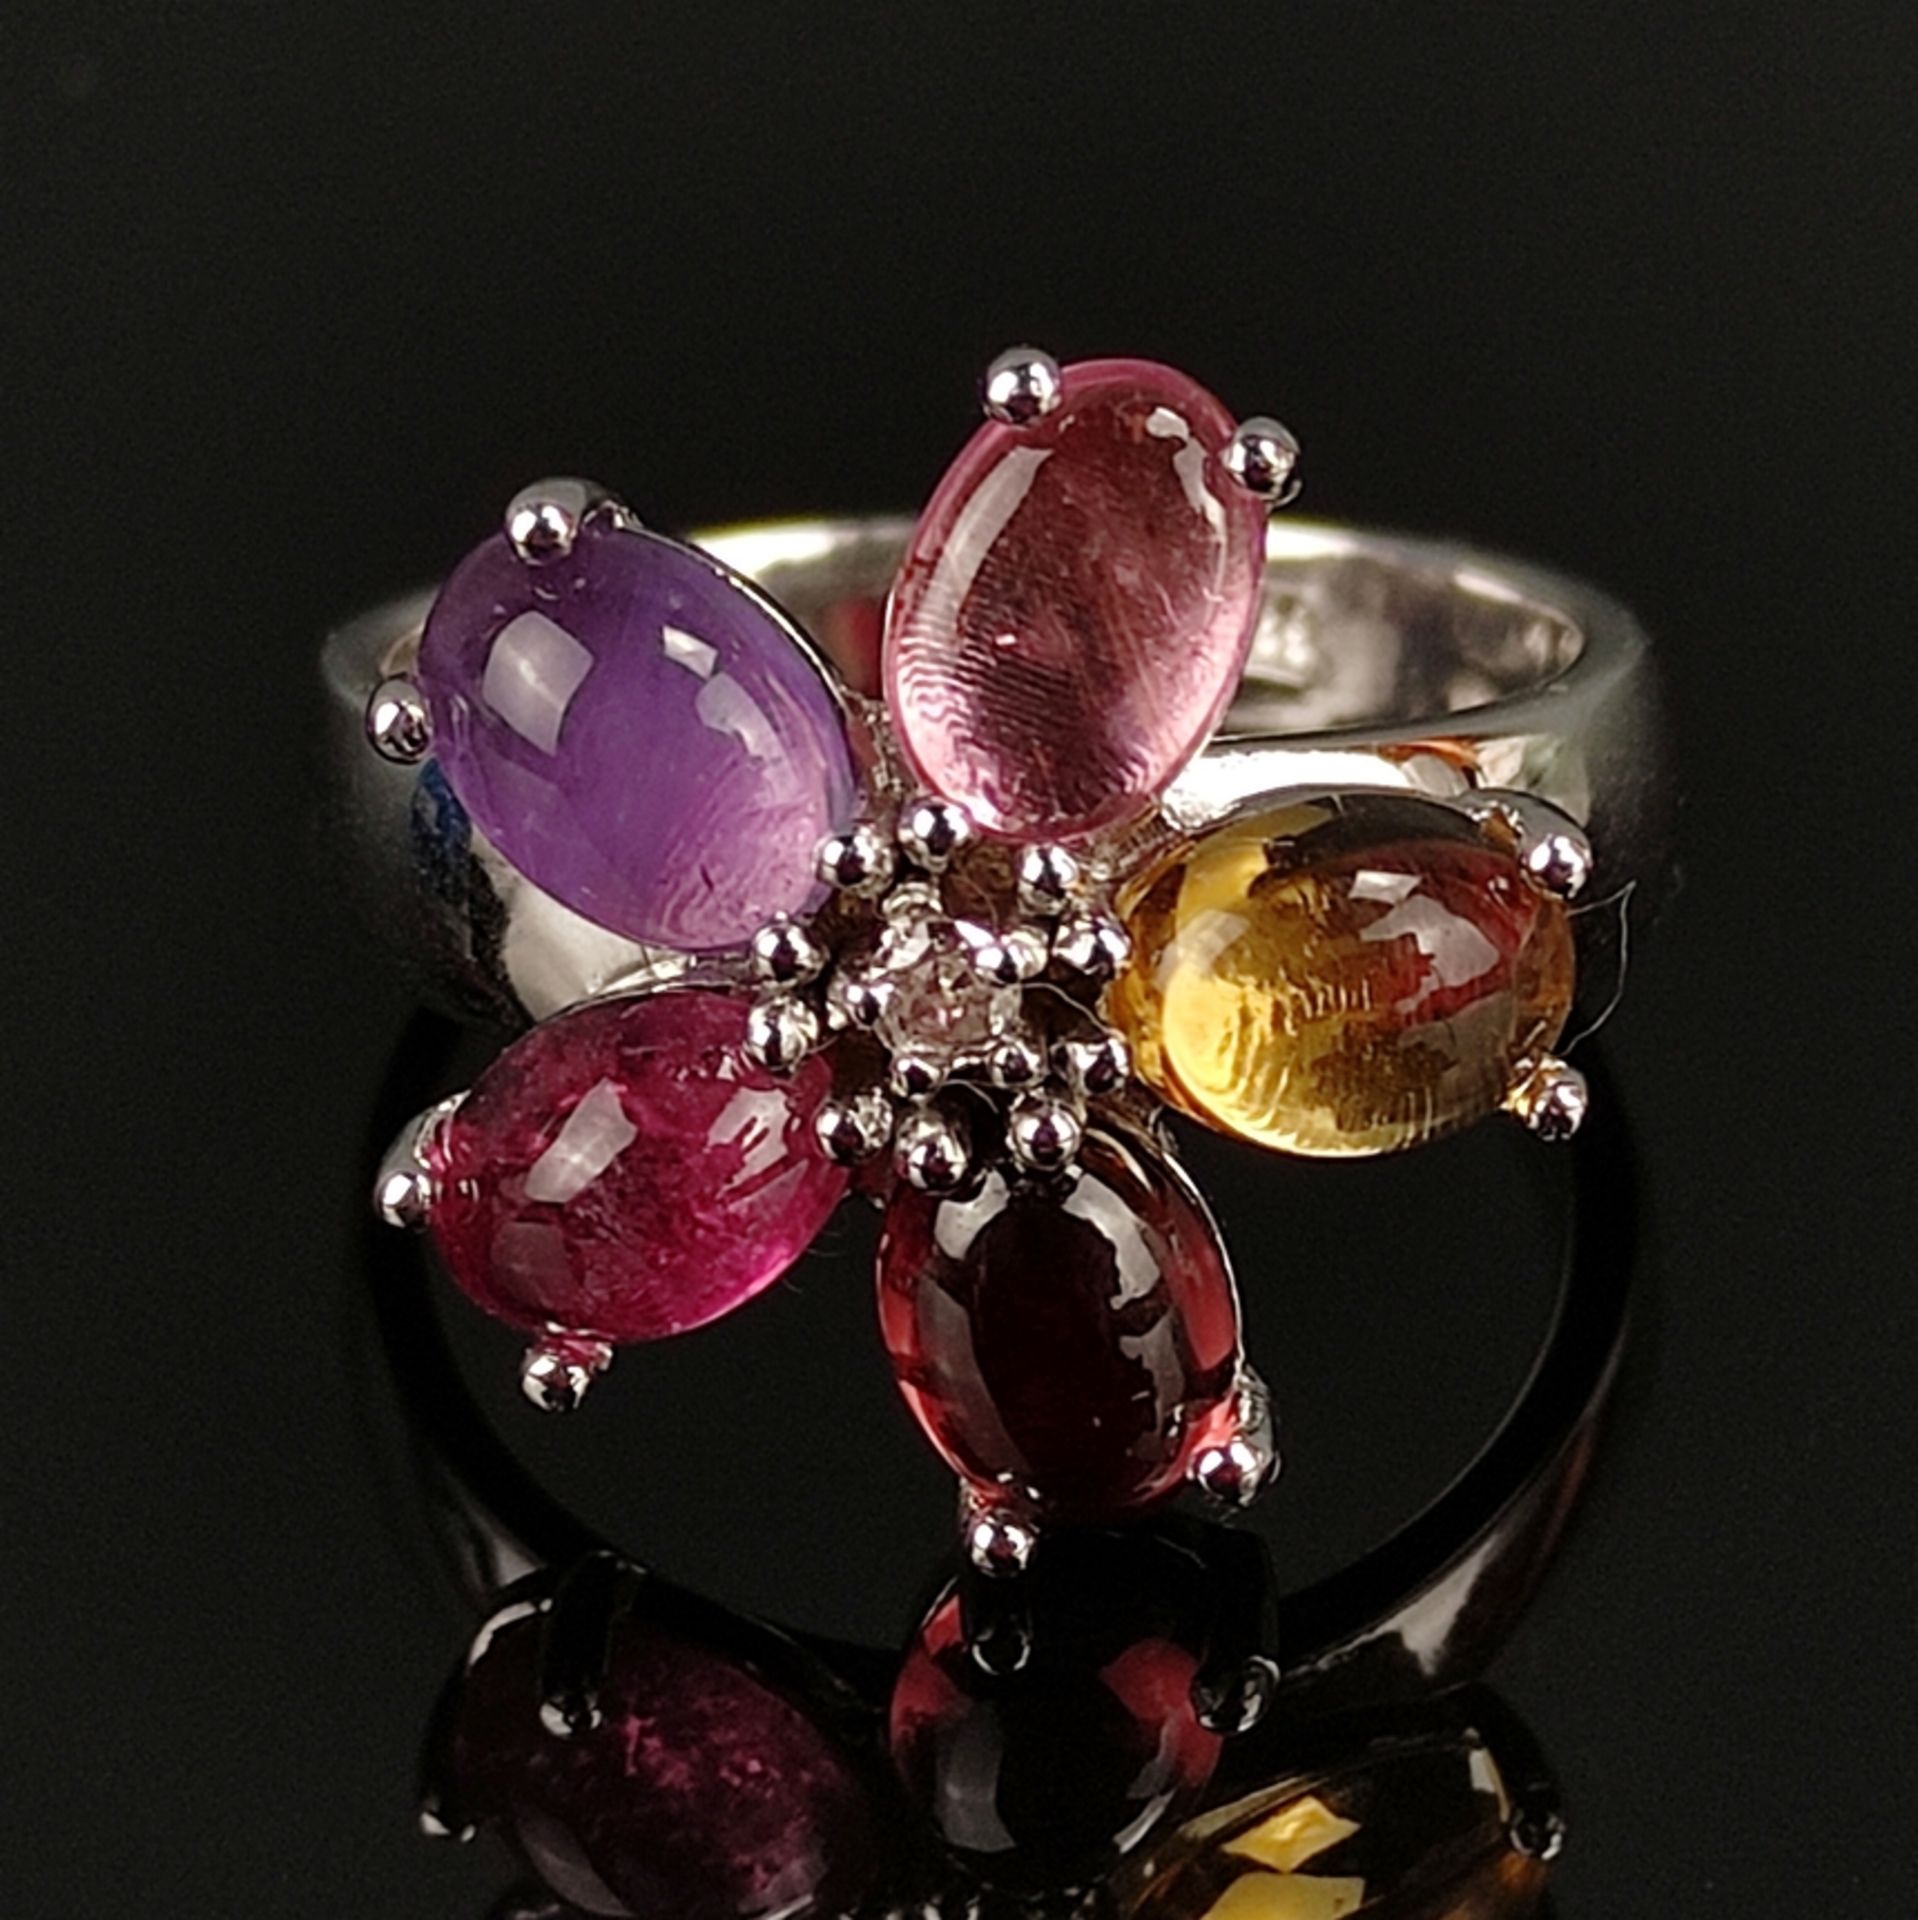 Flower ring, 585/14K white gold (hallmarked), total weight 7.53g, 5 oval coloured stone cabochons a - Image 2 of 3